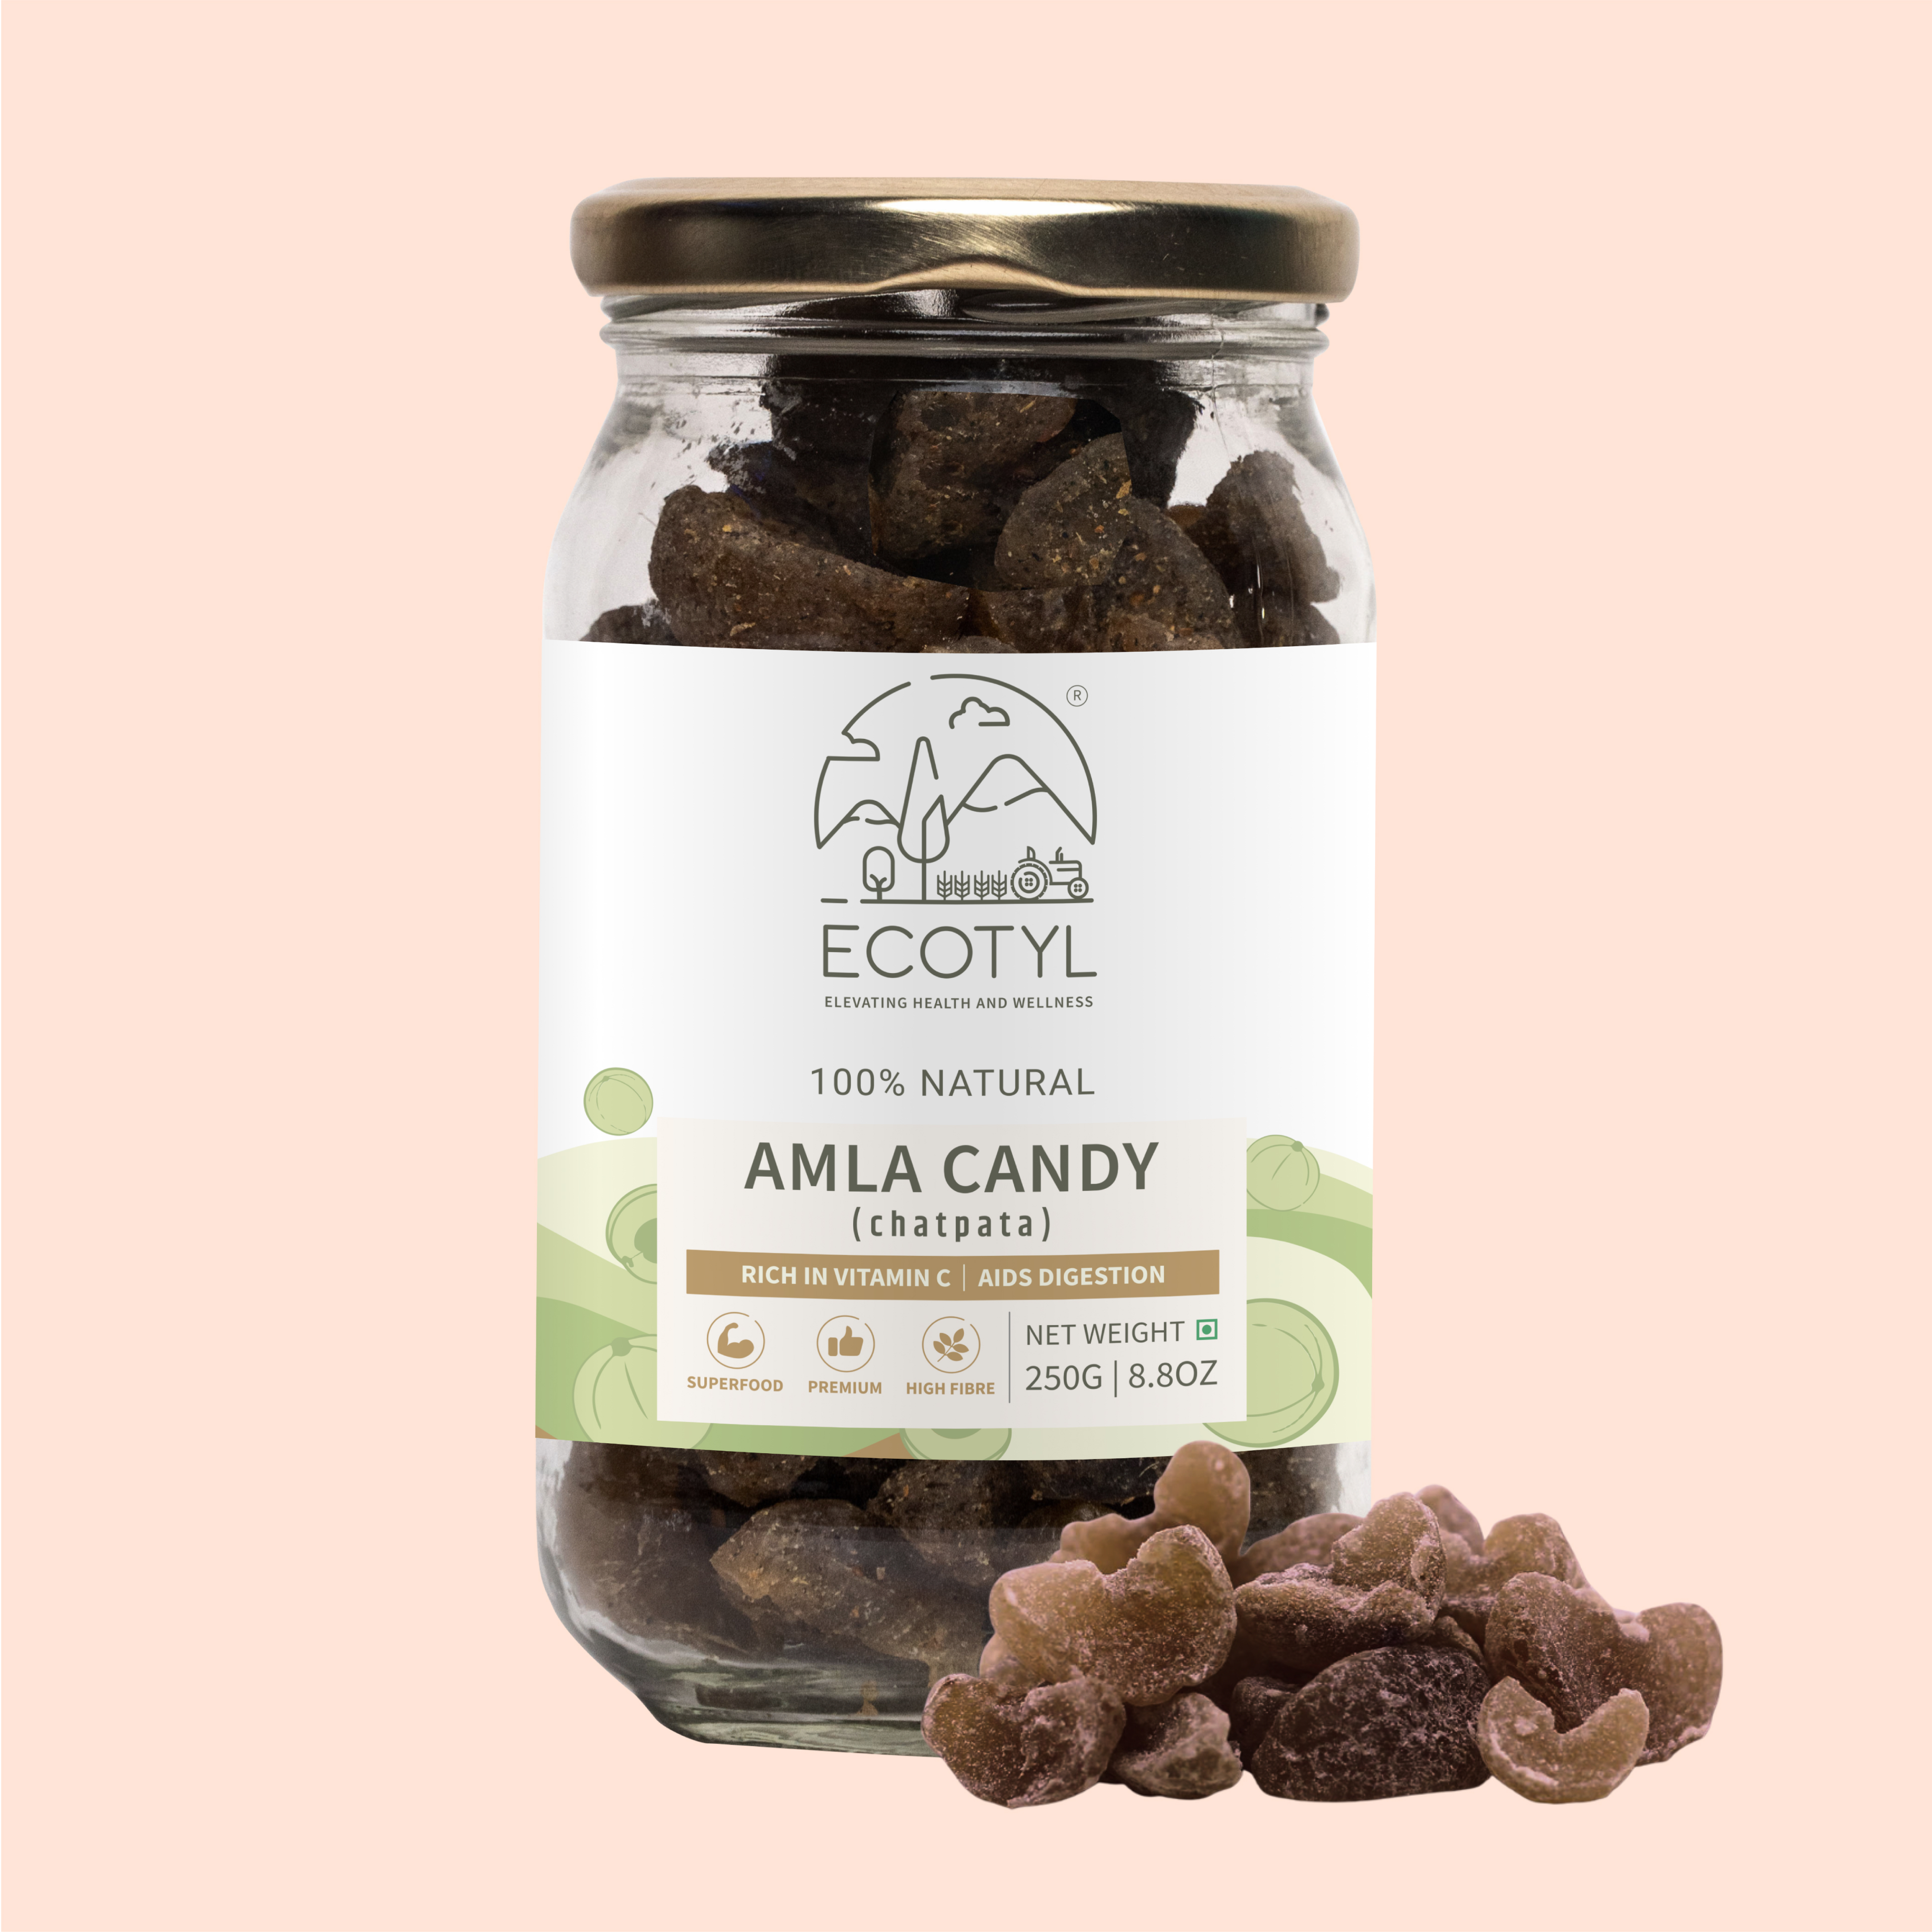 Ecotyl Amla Candy (Chatpata) | After Meal Digestive | Good for Gut Health | 250g